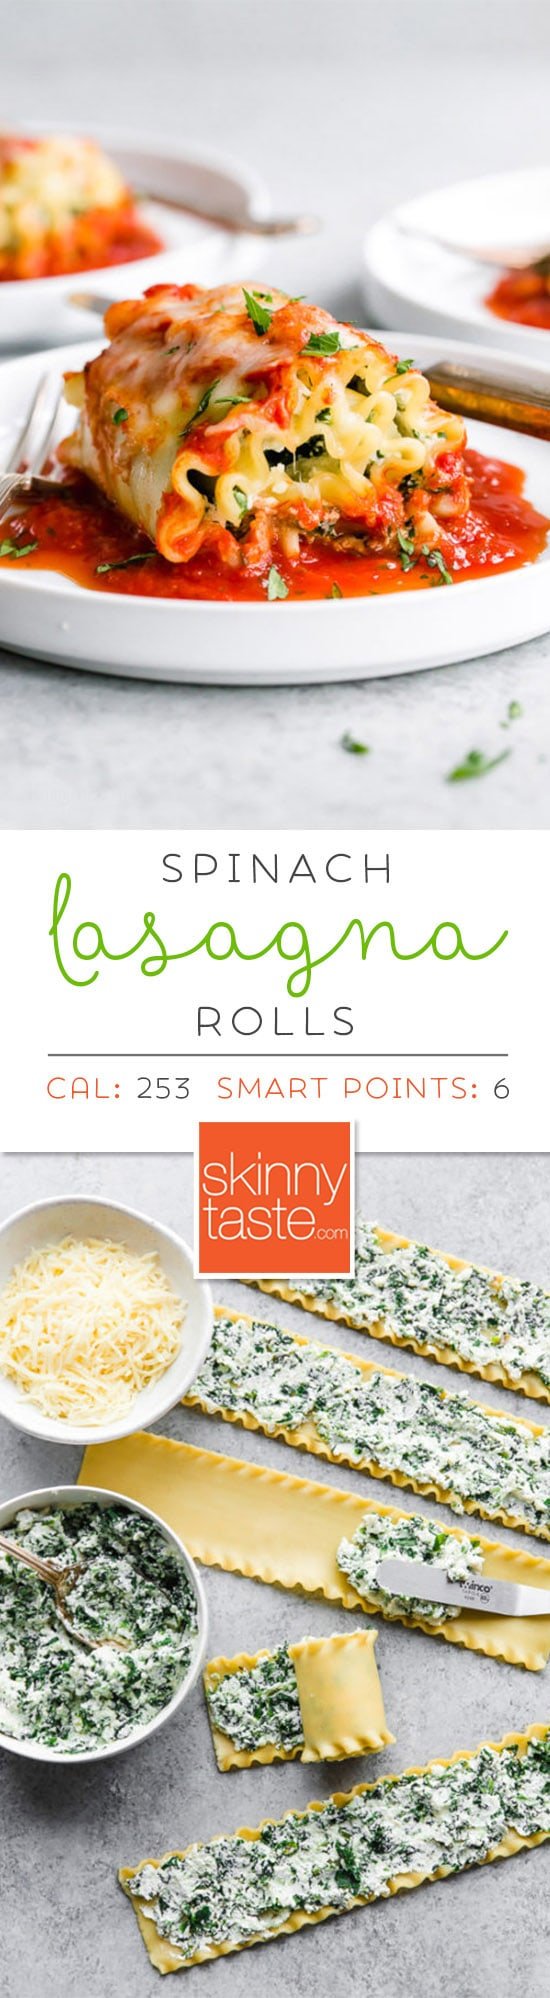 These EASY Spinach Lasagna Roll ups are totally delicious, perfect for entertaining or serving for weeknight meals. Individual vegetarian lasagnas filled with spinach and cheese are family-friendly, satisfying and perfect for portion control. It's also a great way to get your kids to eat spinach and no one will miss the meat! #lasagna #lasagnarollups #spinachlasagna #vegetarianlasagna